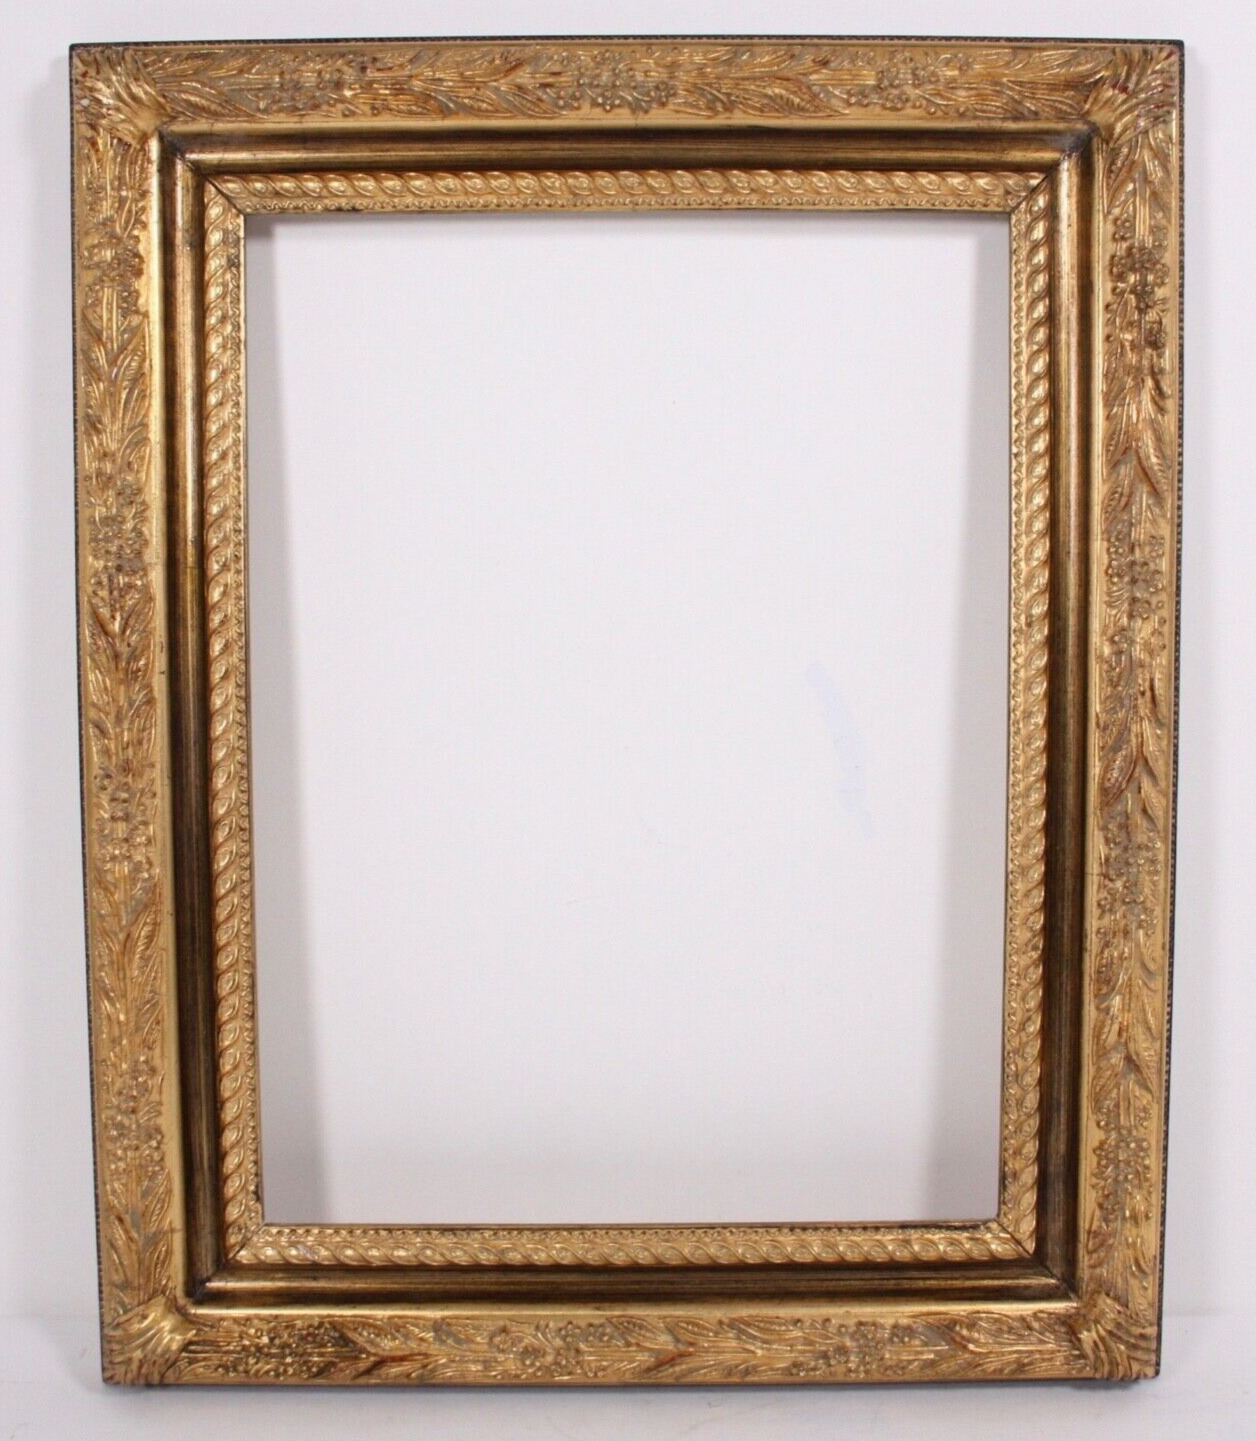 Ornate Gold Gilt Vtg 21x17 Faux Wood Resin Frame For 16x12 Painting 17th C Style